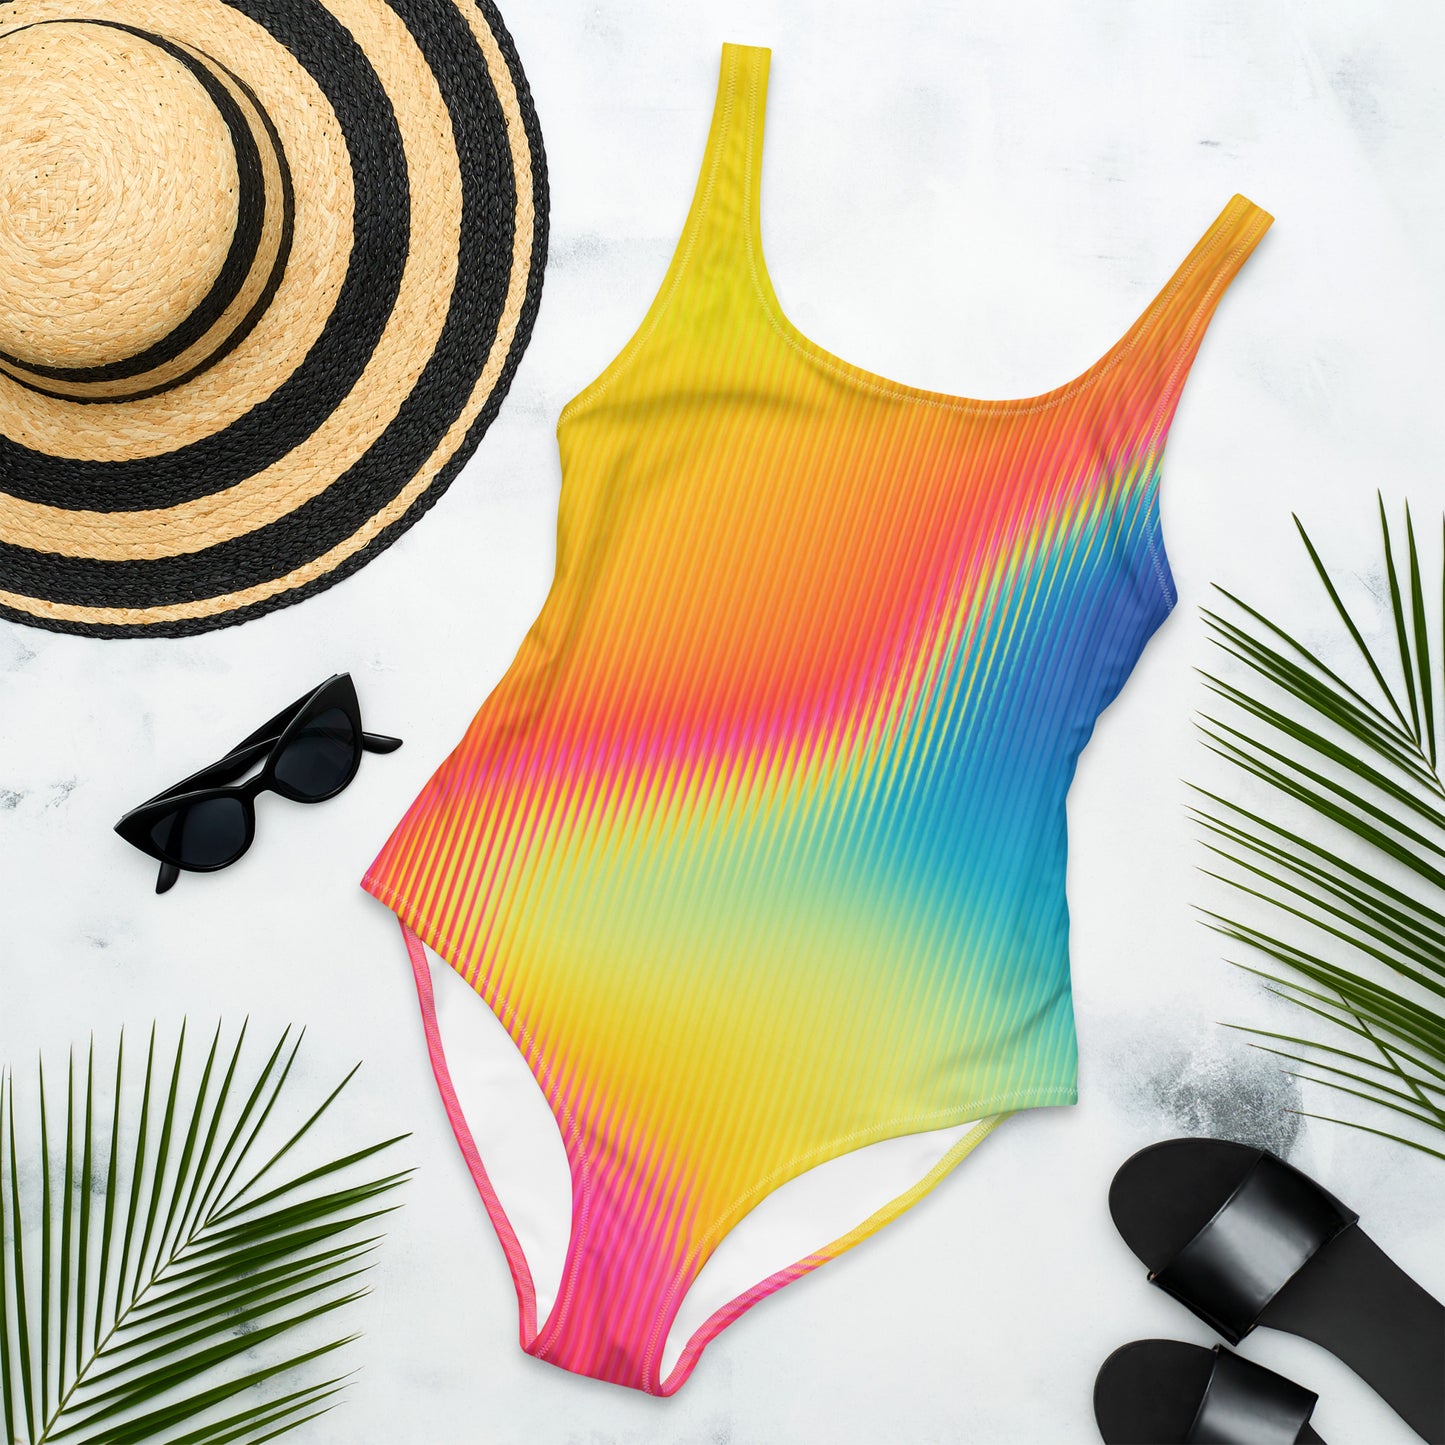 TROPICAL LIGHTS ONE-PIECE SWIMSUIT